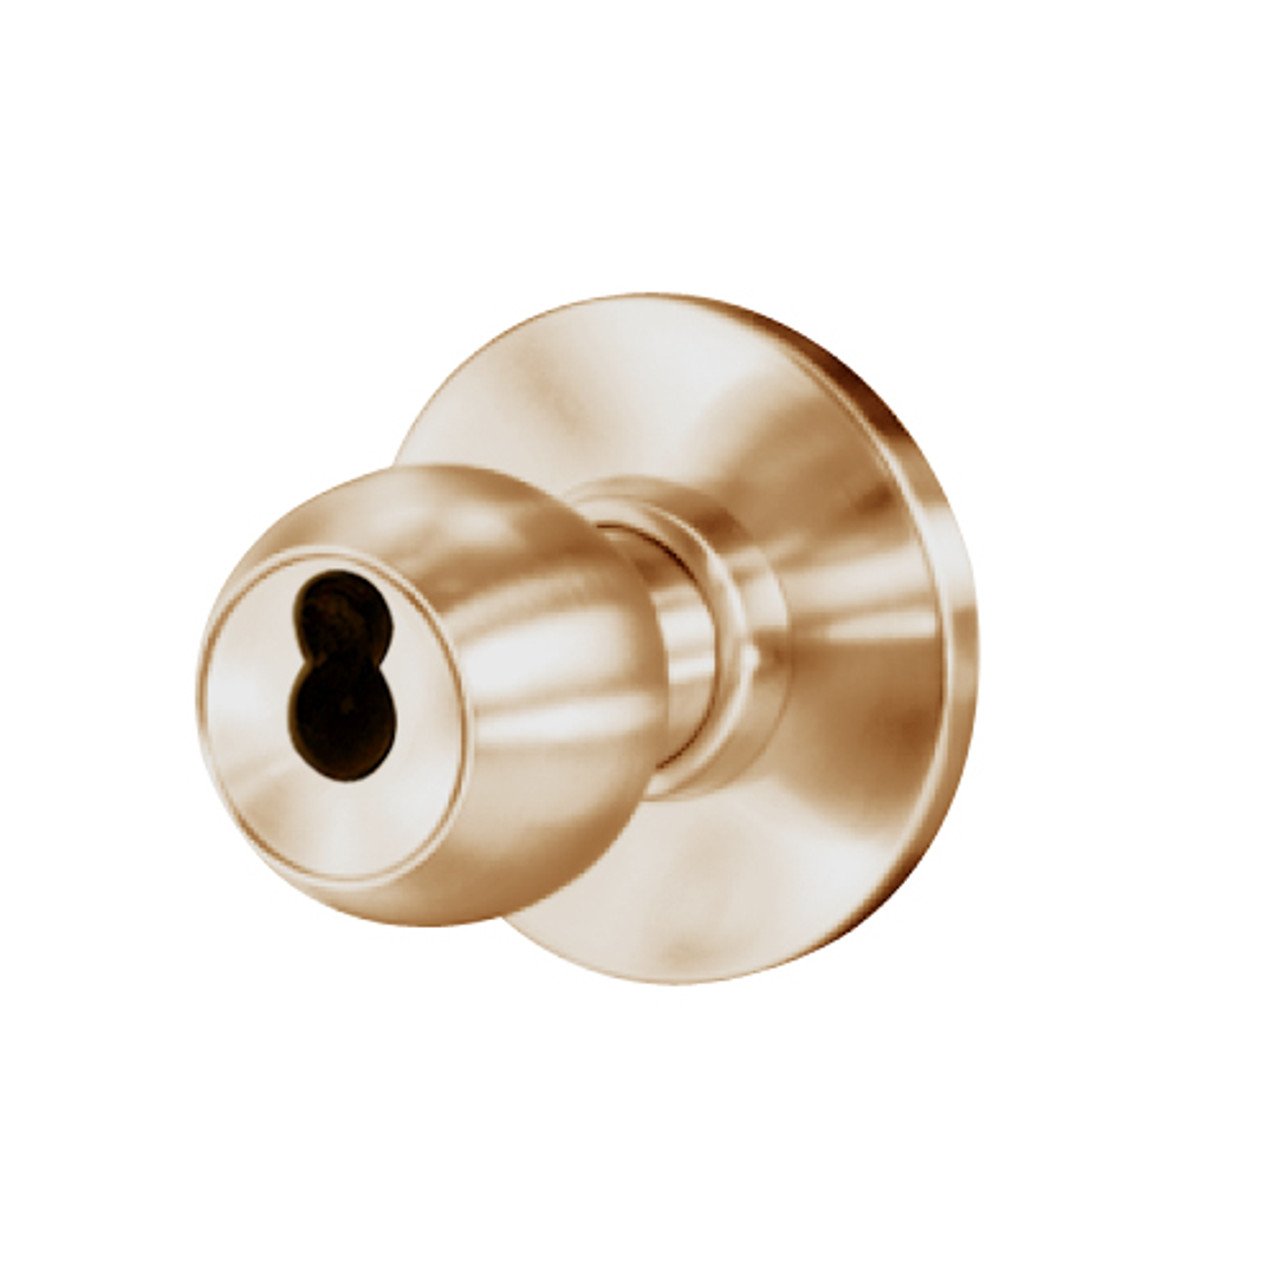 8K37AB4AS3612 Best 8K Series Entrance Heavy Duty Cylindrical Knob Locks with Round Style in Satin Bronze